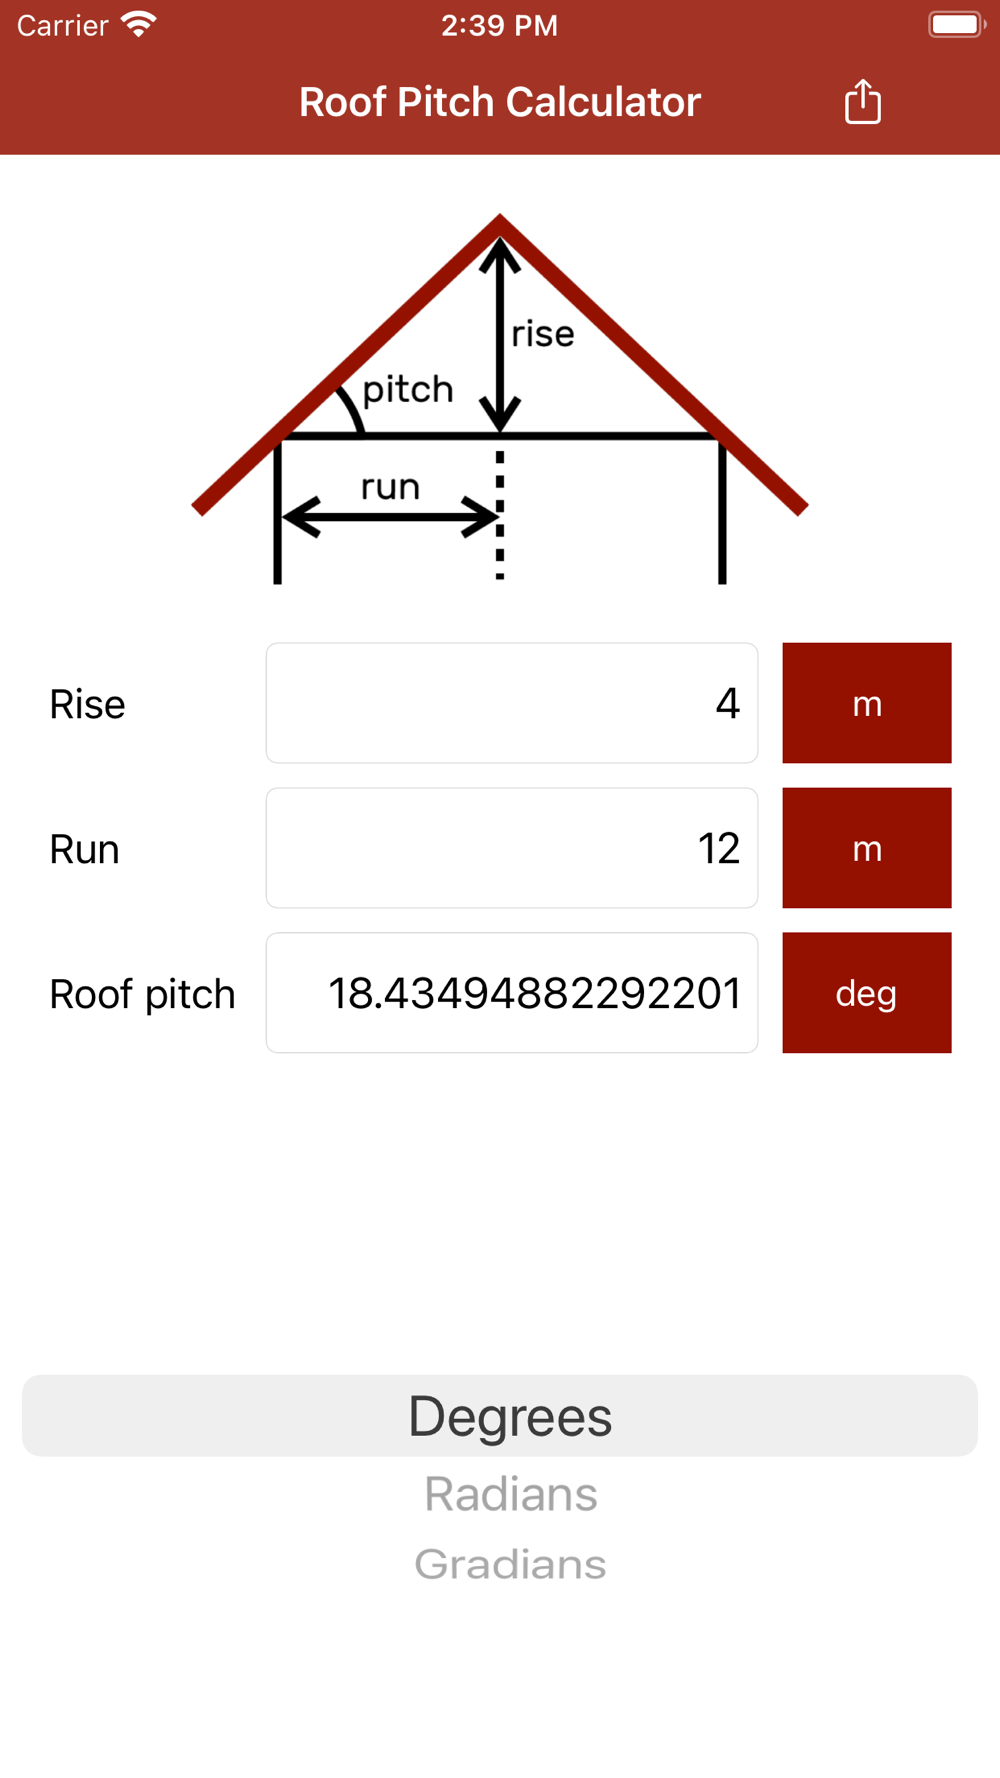 Roof Pitch Calculator Download App for iPhone - STEPrimo.com